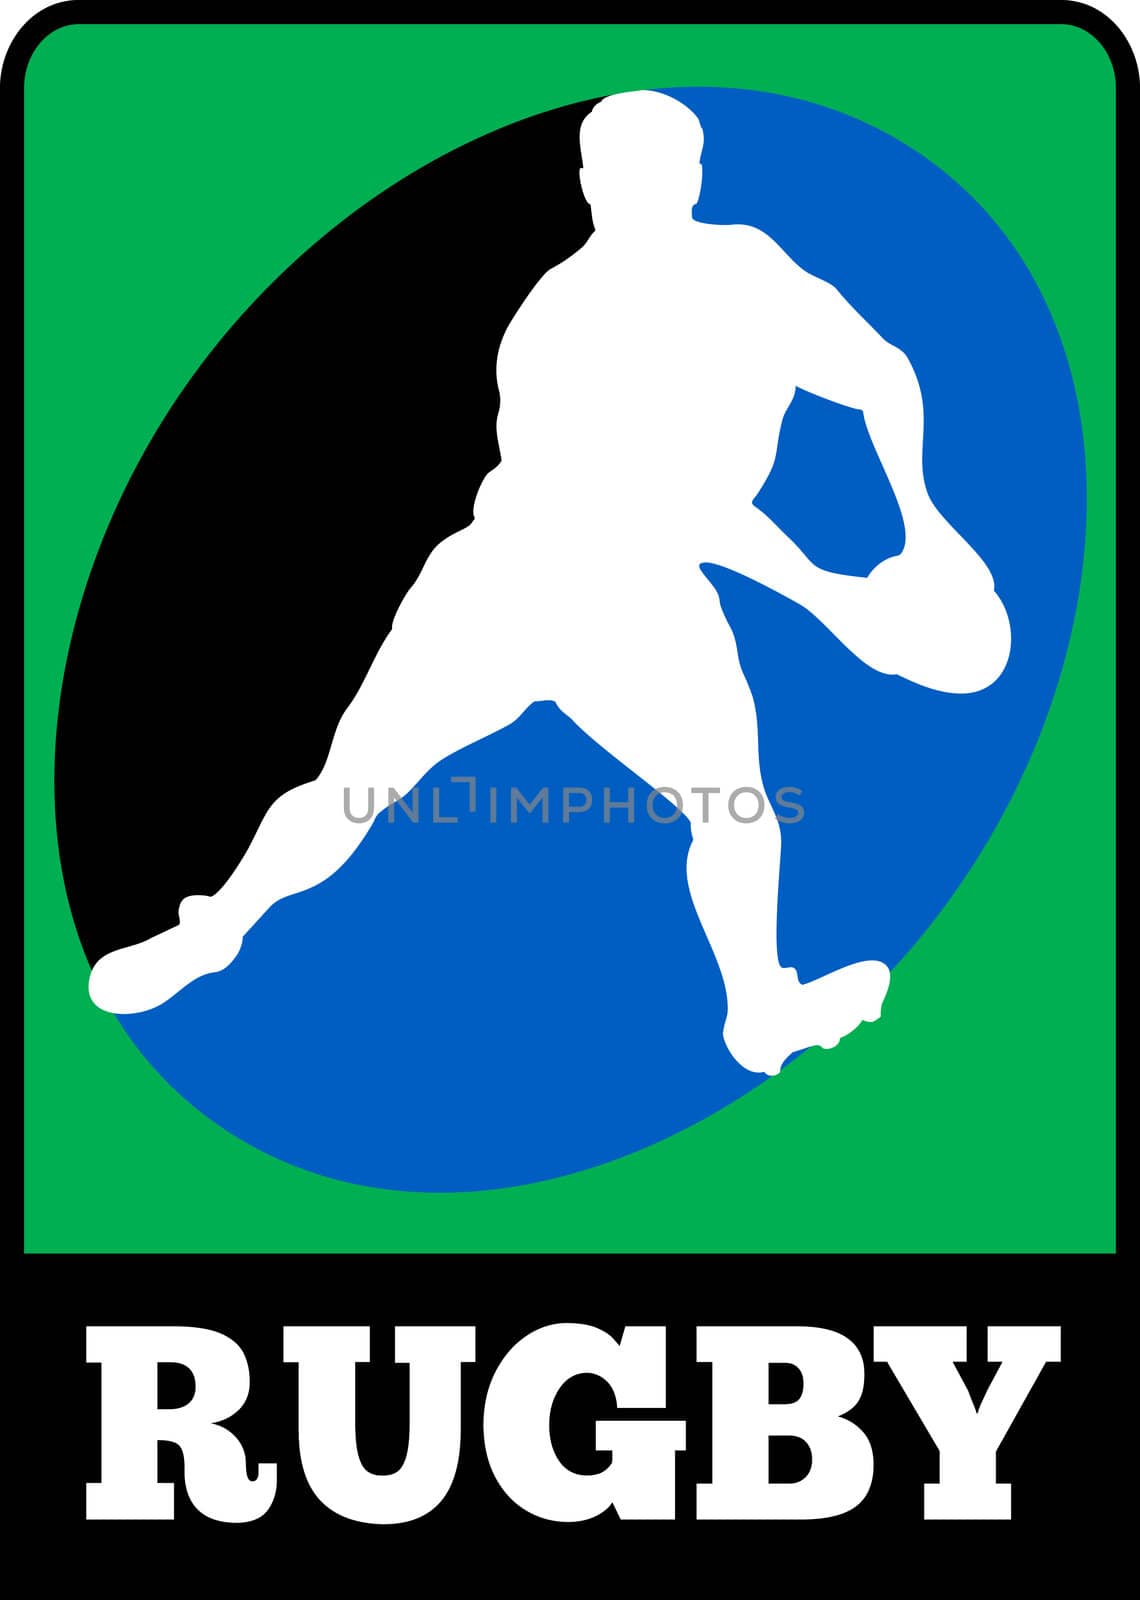 illustration of a silhouette of Rugby player running passing run ball with words "rugby"